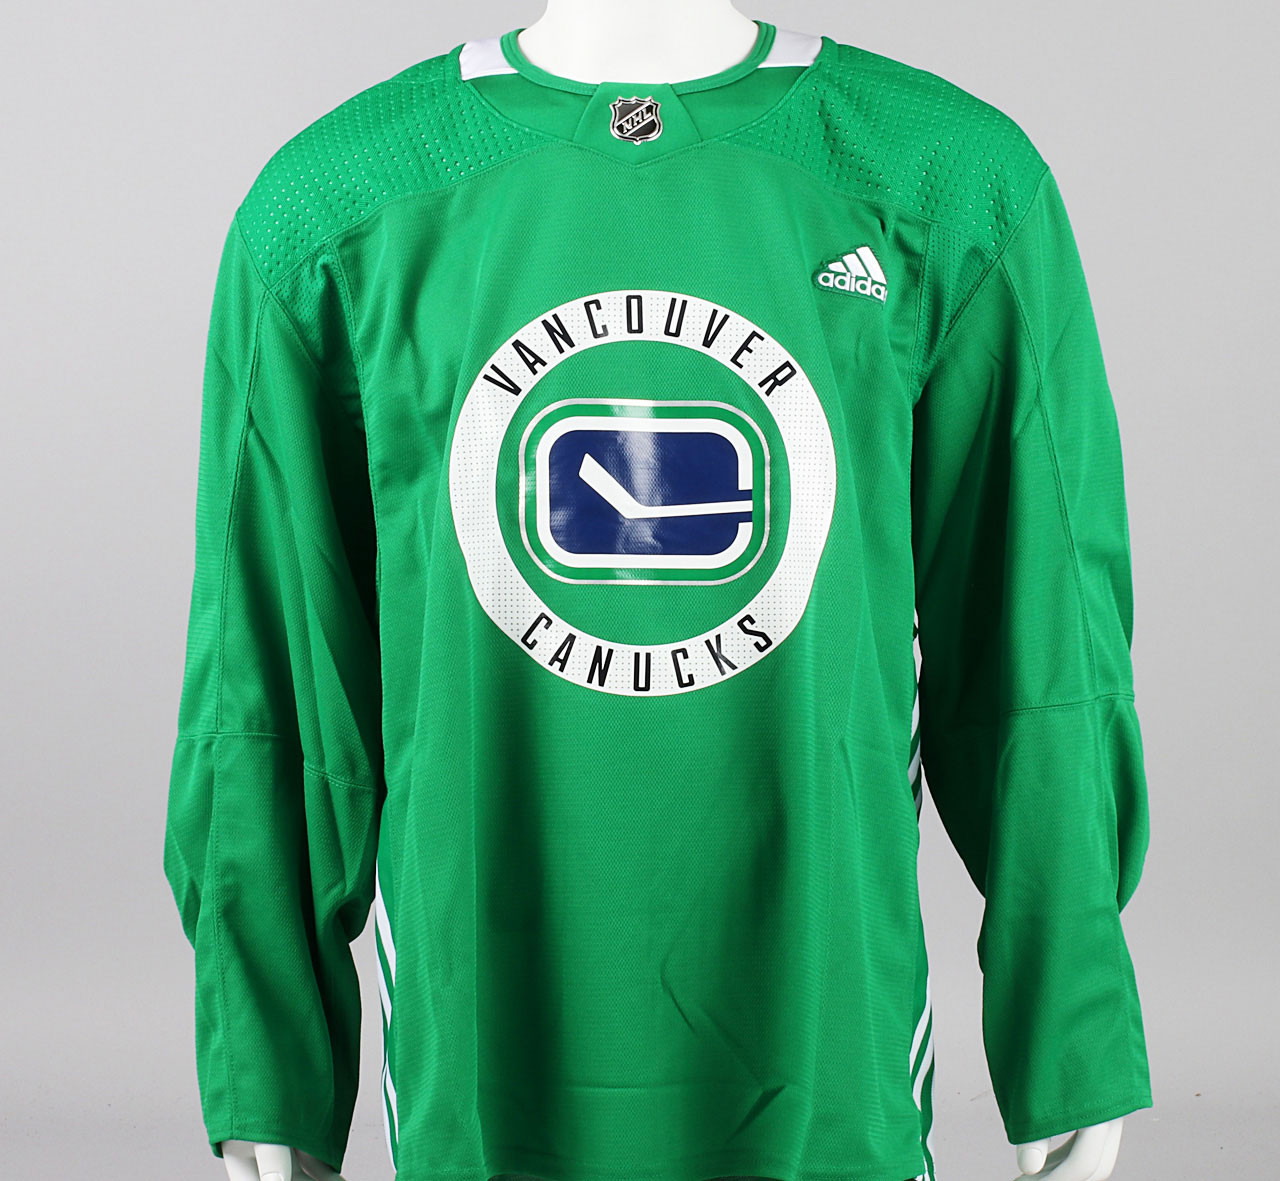 Practice Jersey - Vancouver Canucks 